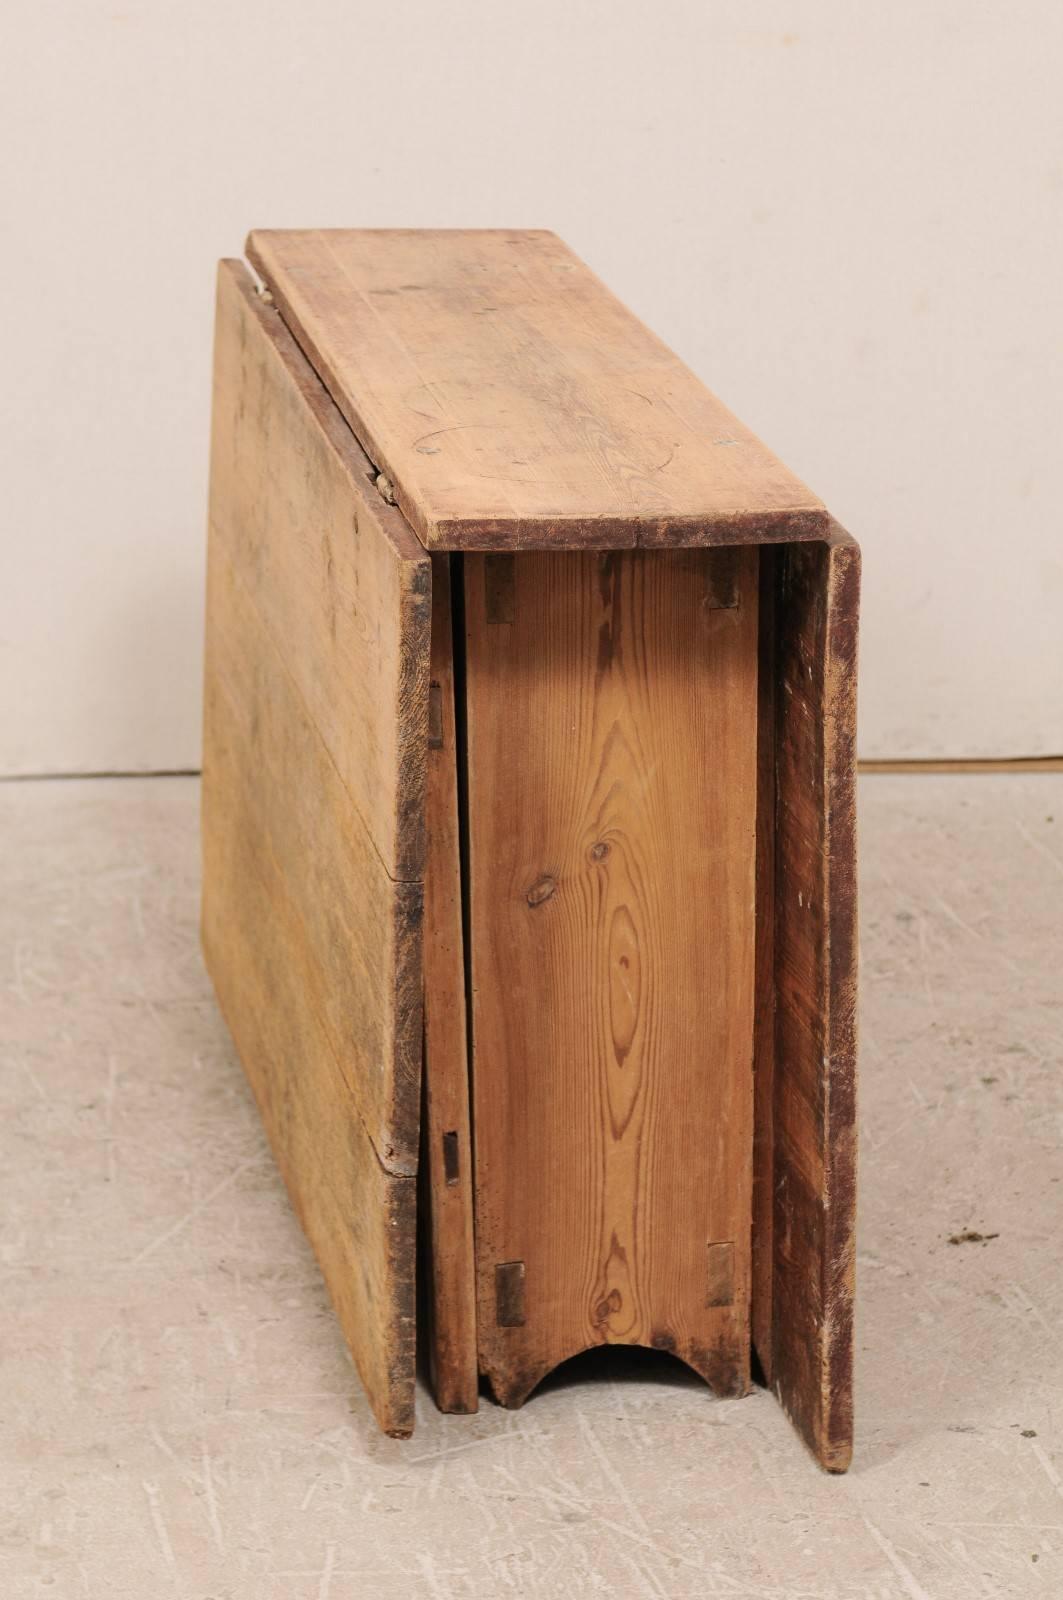 Carved Swedish Early 19th Century Drop-Leaf / Gate Leg Table with Original Wood Finish For Sale